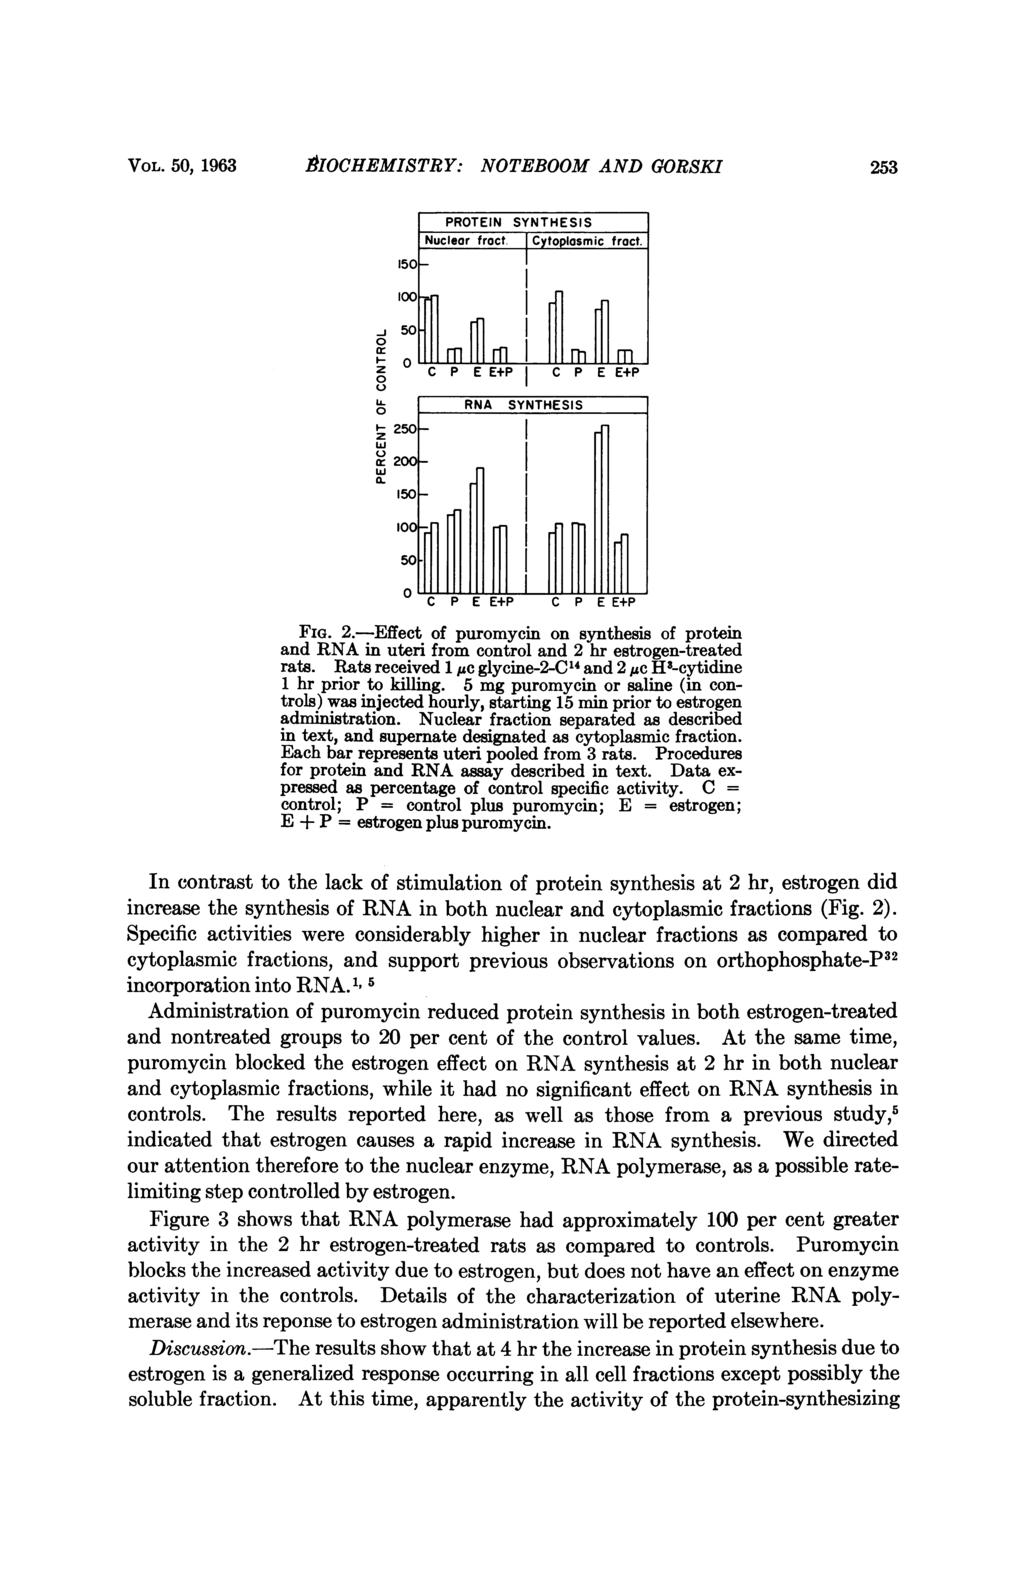 VOL. 50, 1963.IOCHEMISTRY: NOTEBOOM AND GORSKI 253 PROTEIN SYNTHESIS Nuclear fract. Cytoplasmic tract.